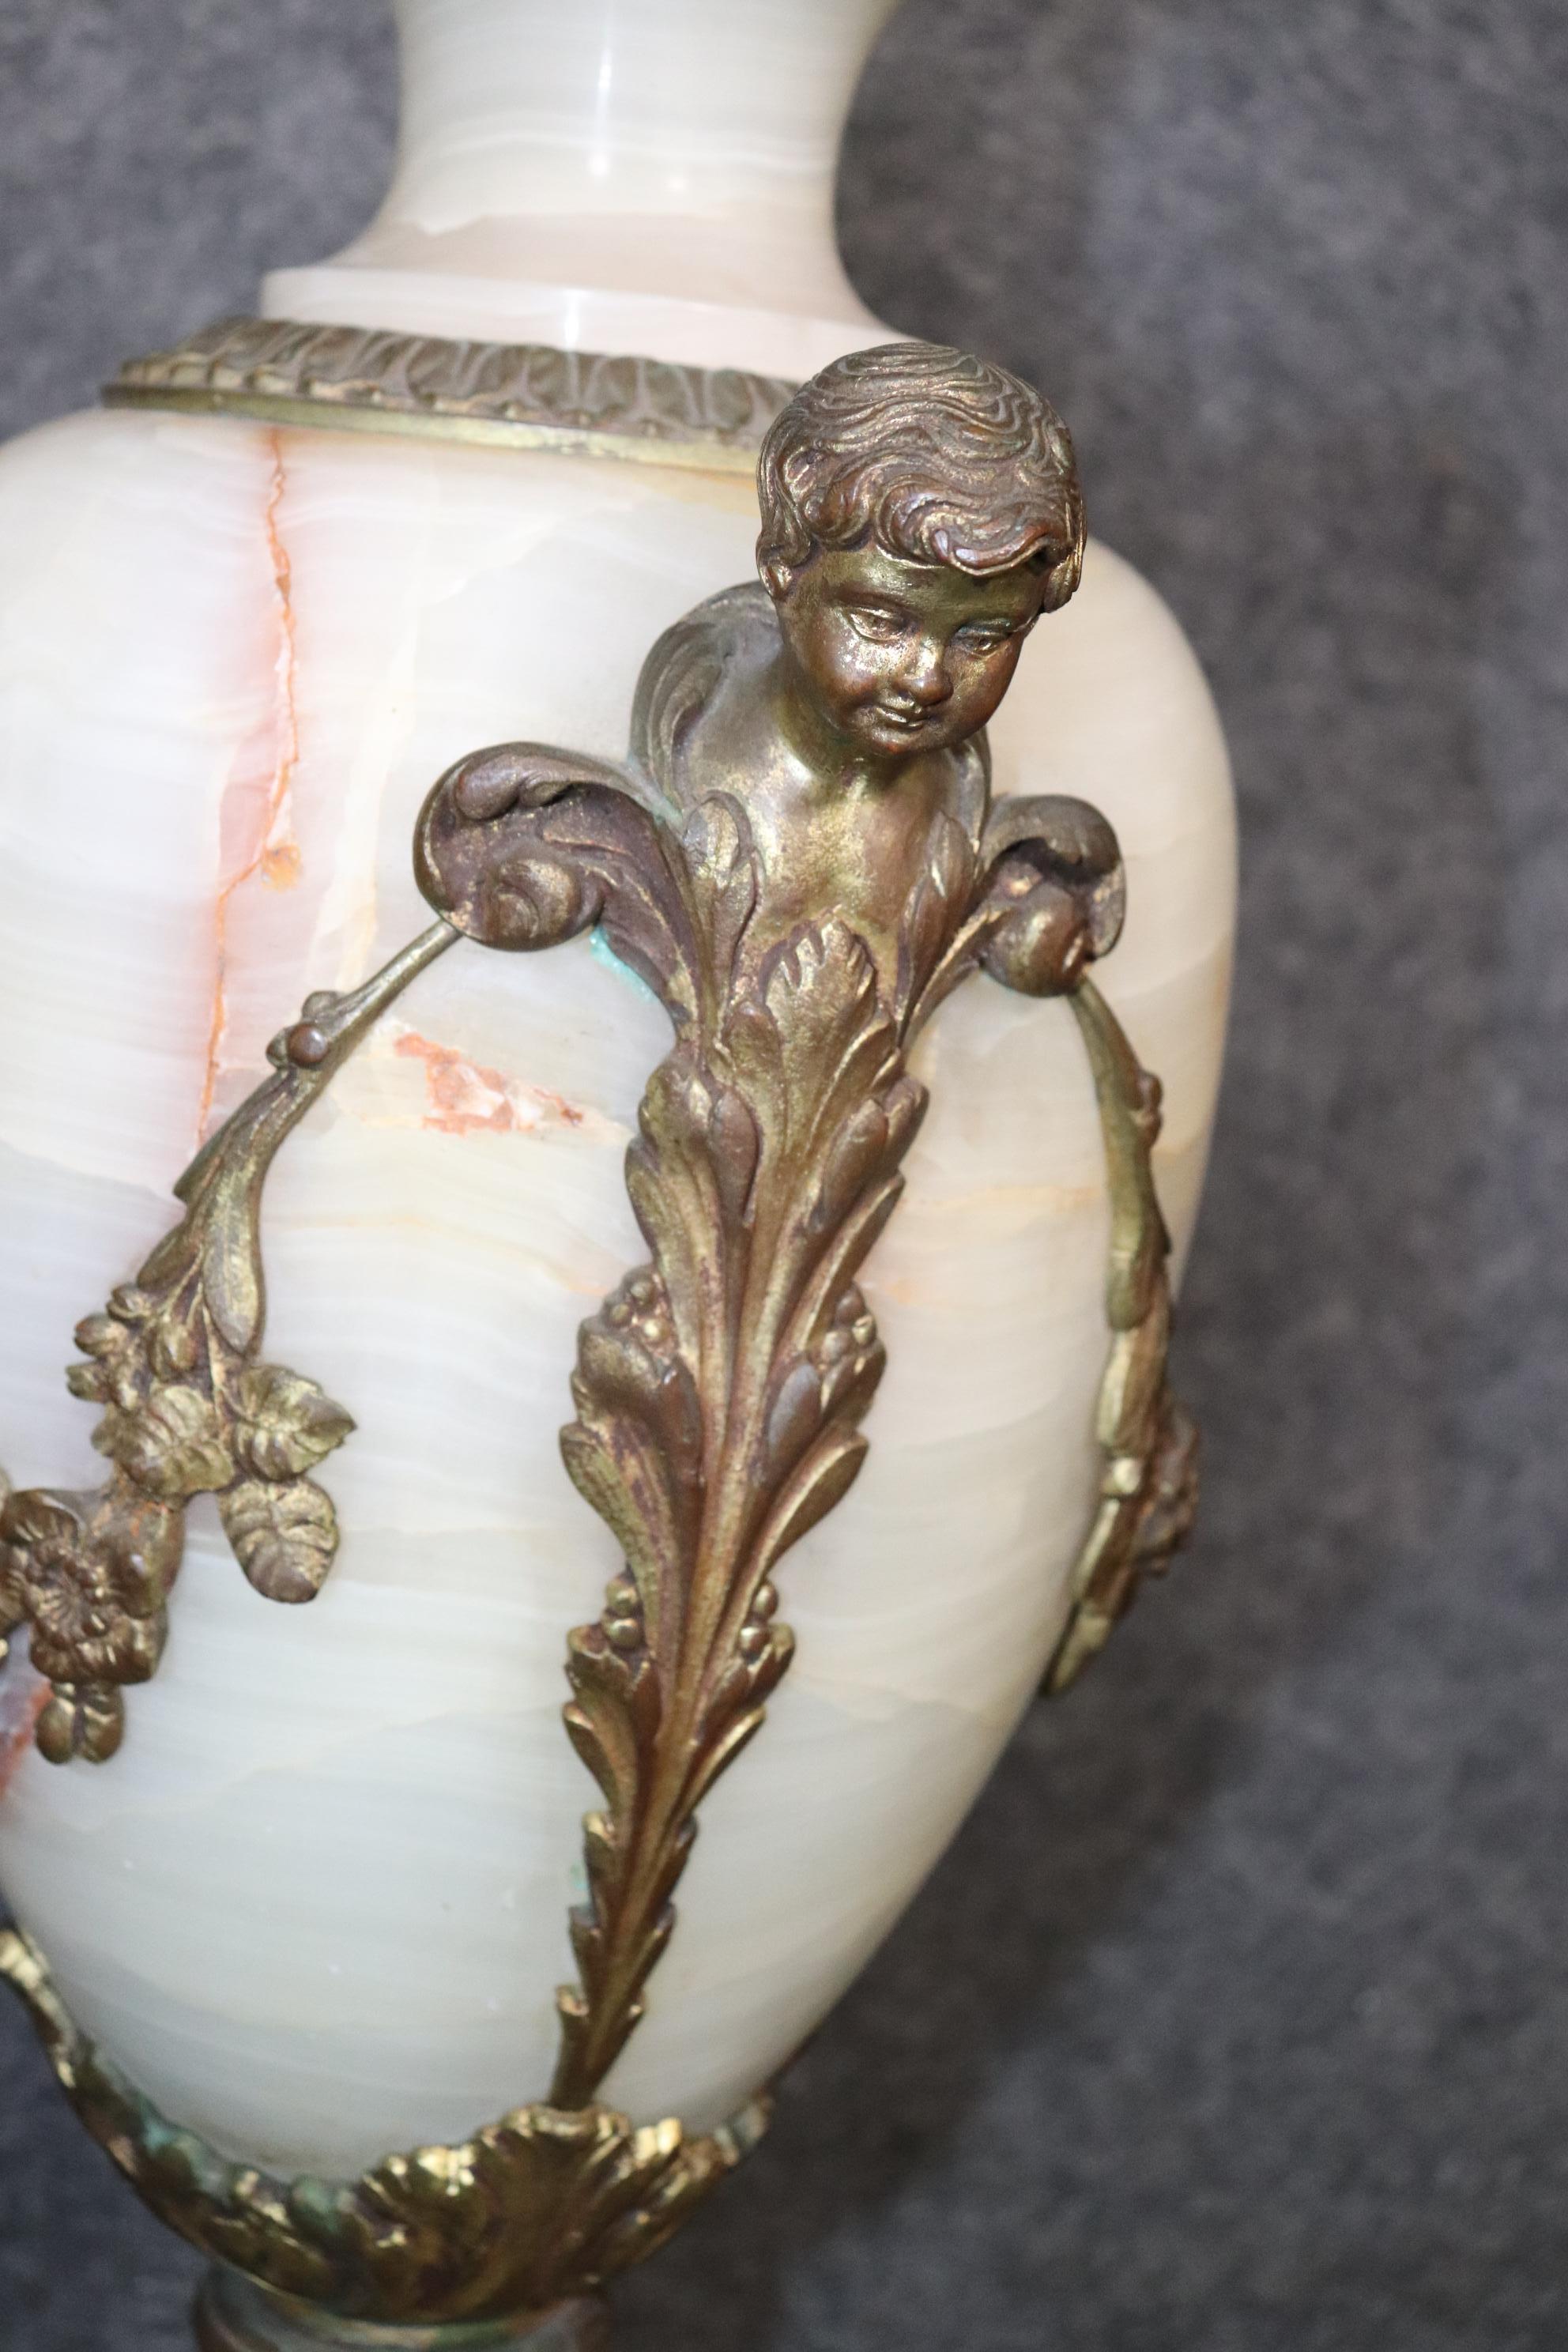 This is a beautiful pair of white translucent onyx cassolettes. They are adorned with the bronze putti or cherubs and floral wreathes. They date to the 1880-90s era and are in good condition with normal age related signs of wear and use. They